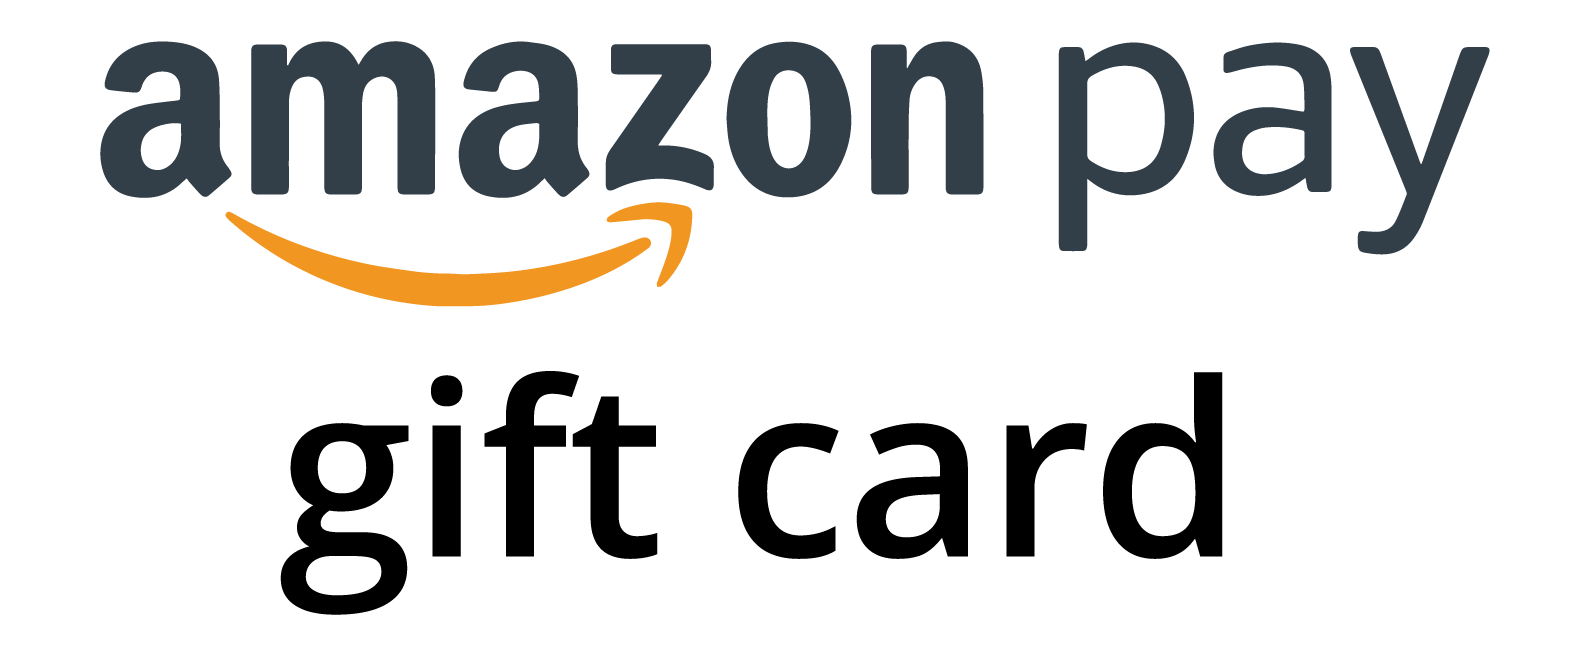 Amazon Pay Gift Card worth ₹250*